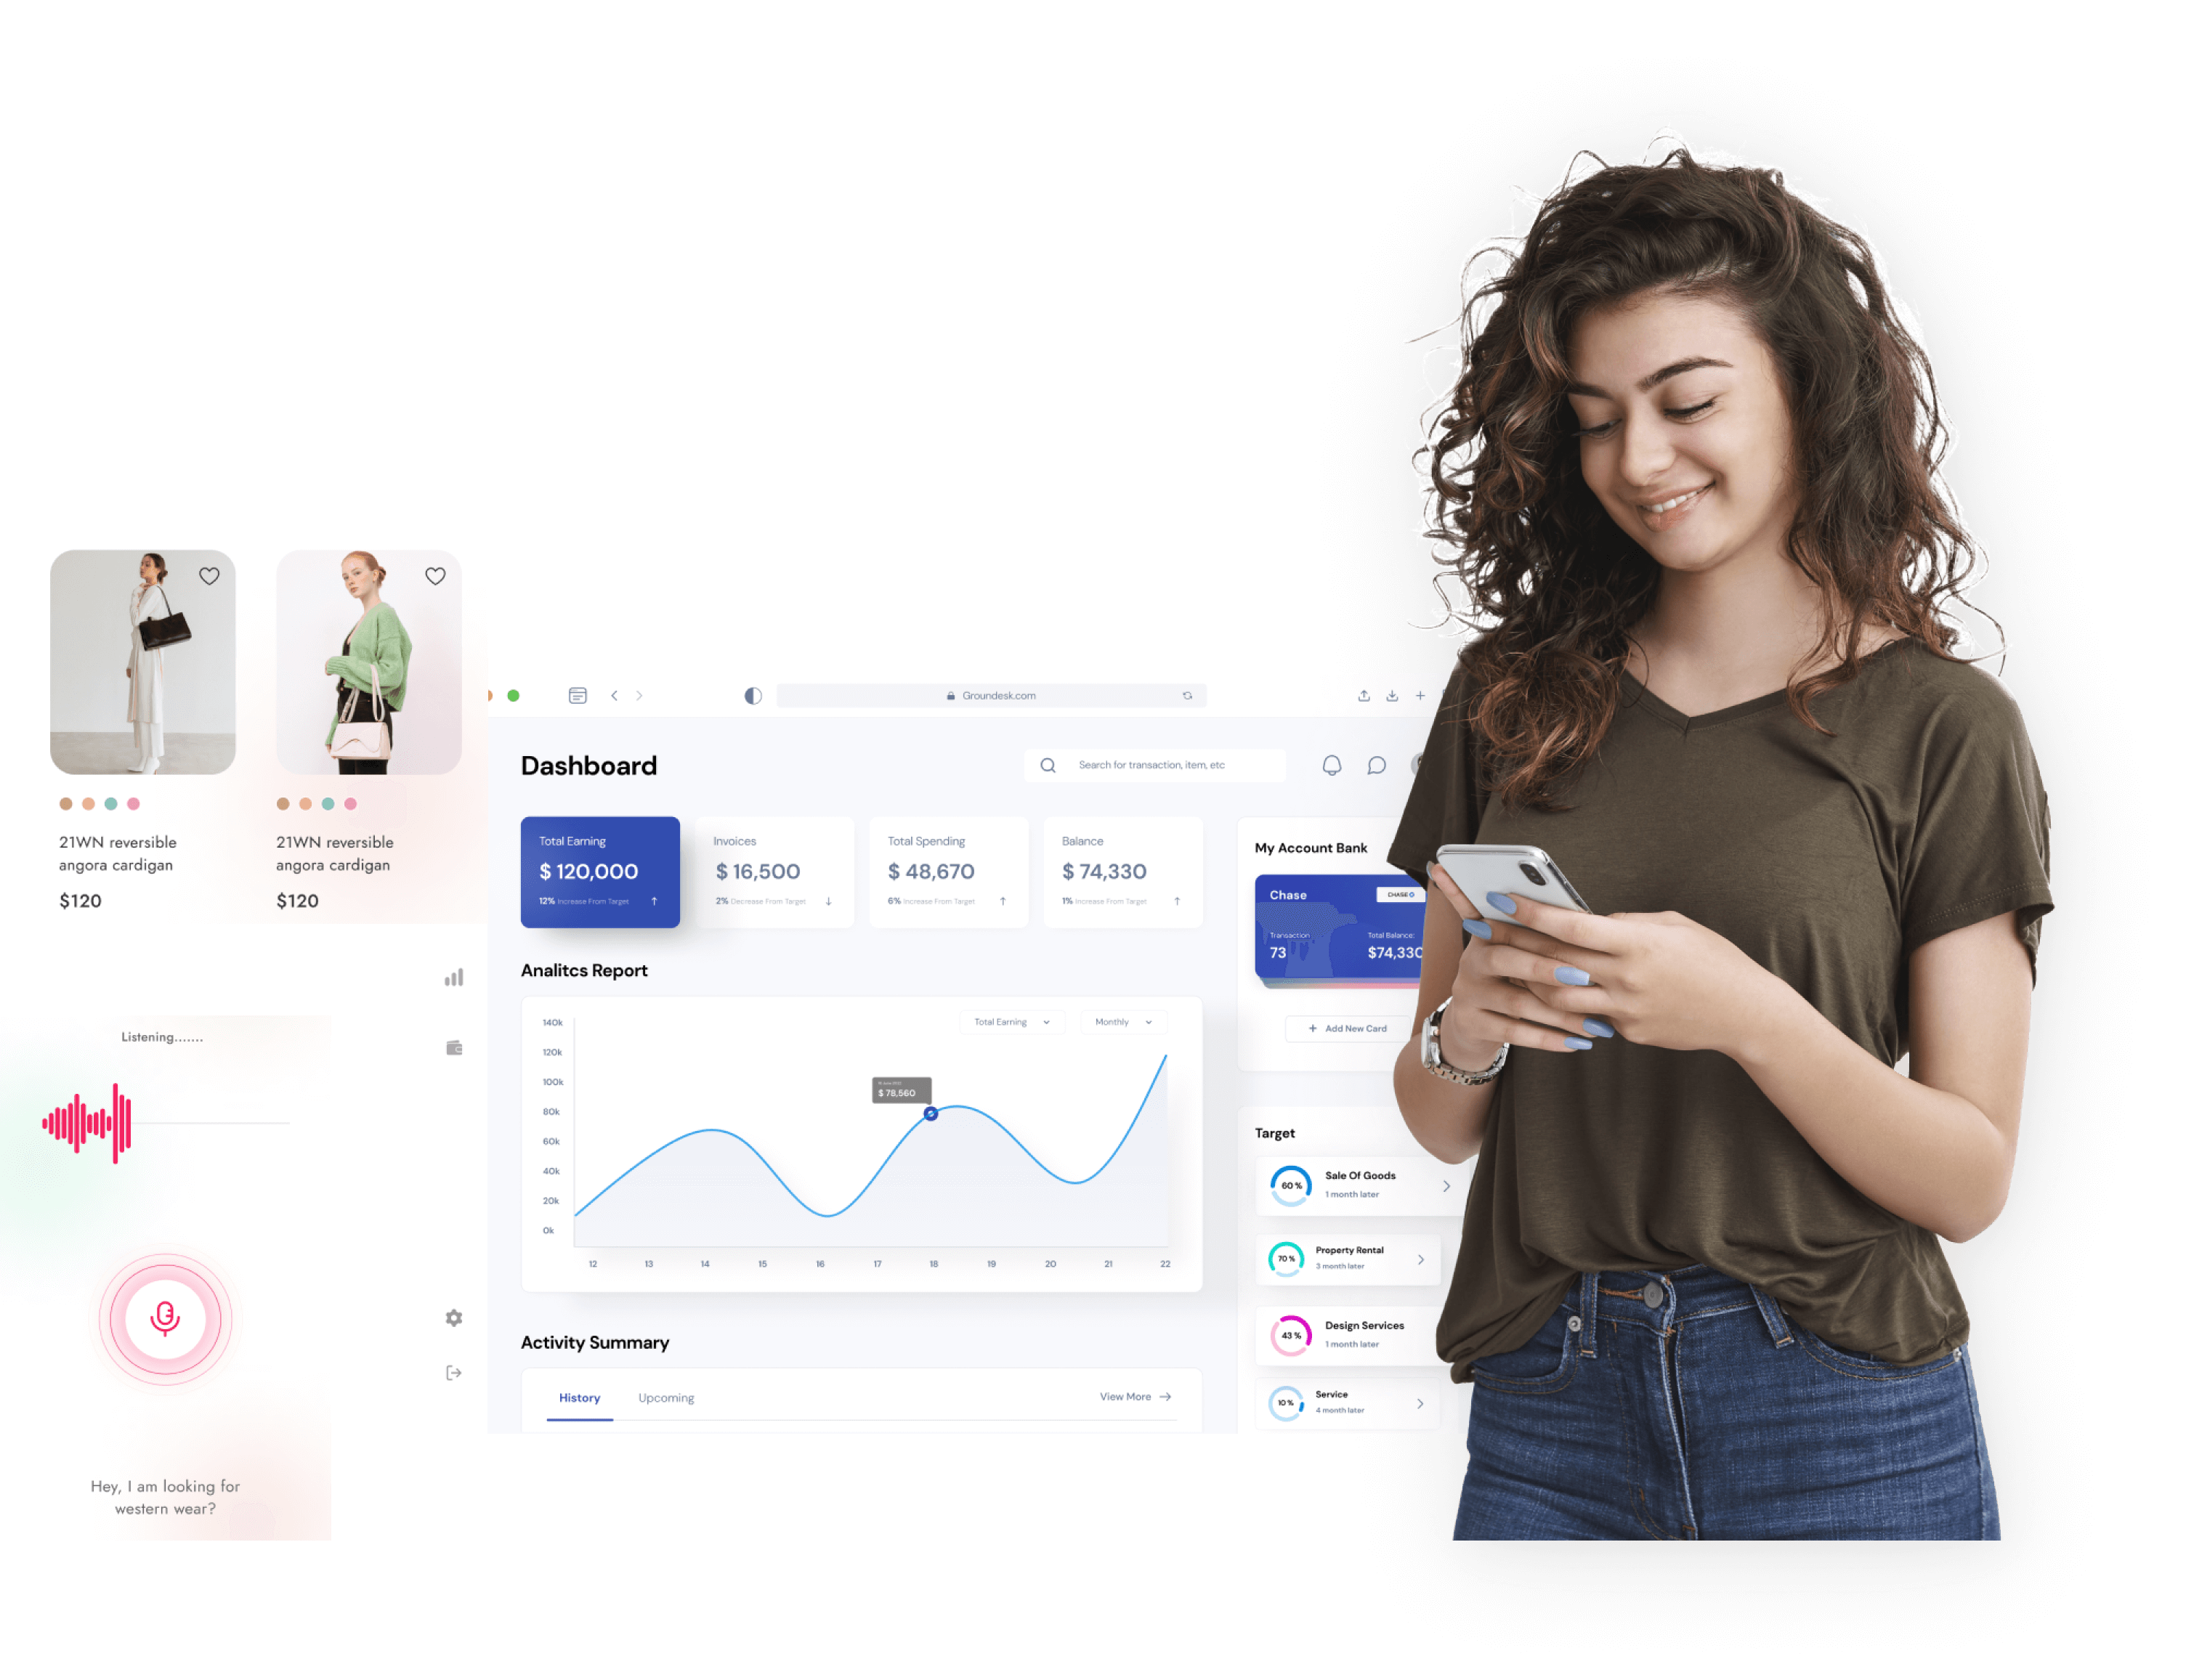 A girl with curly hair and wearing green top with jeans staring at her phone screen looking at clean and attractive eCommerce solutions developed by Technocrats eCommerce development company